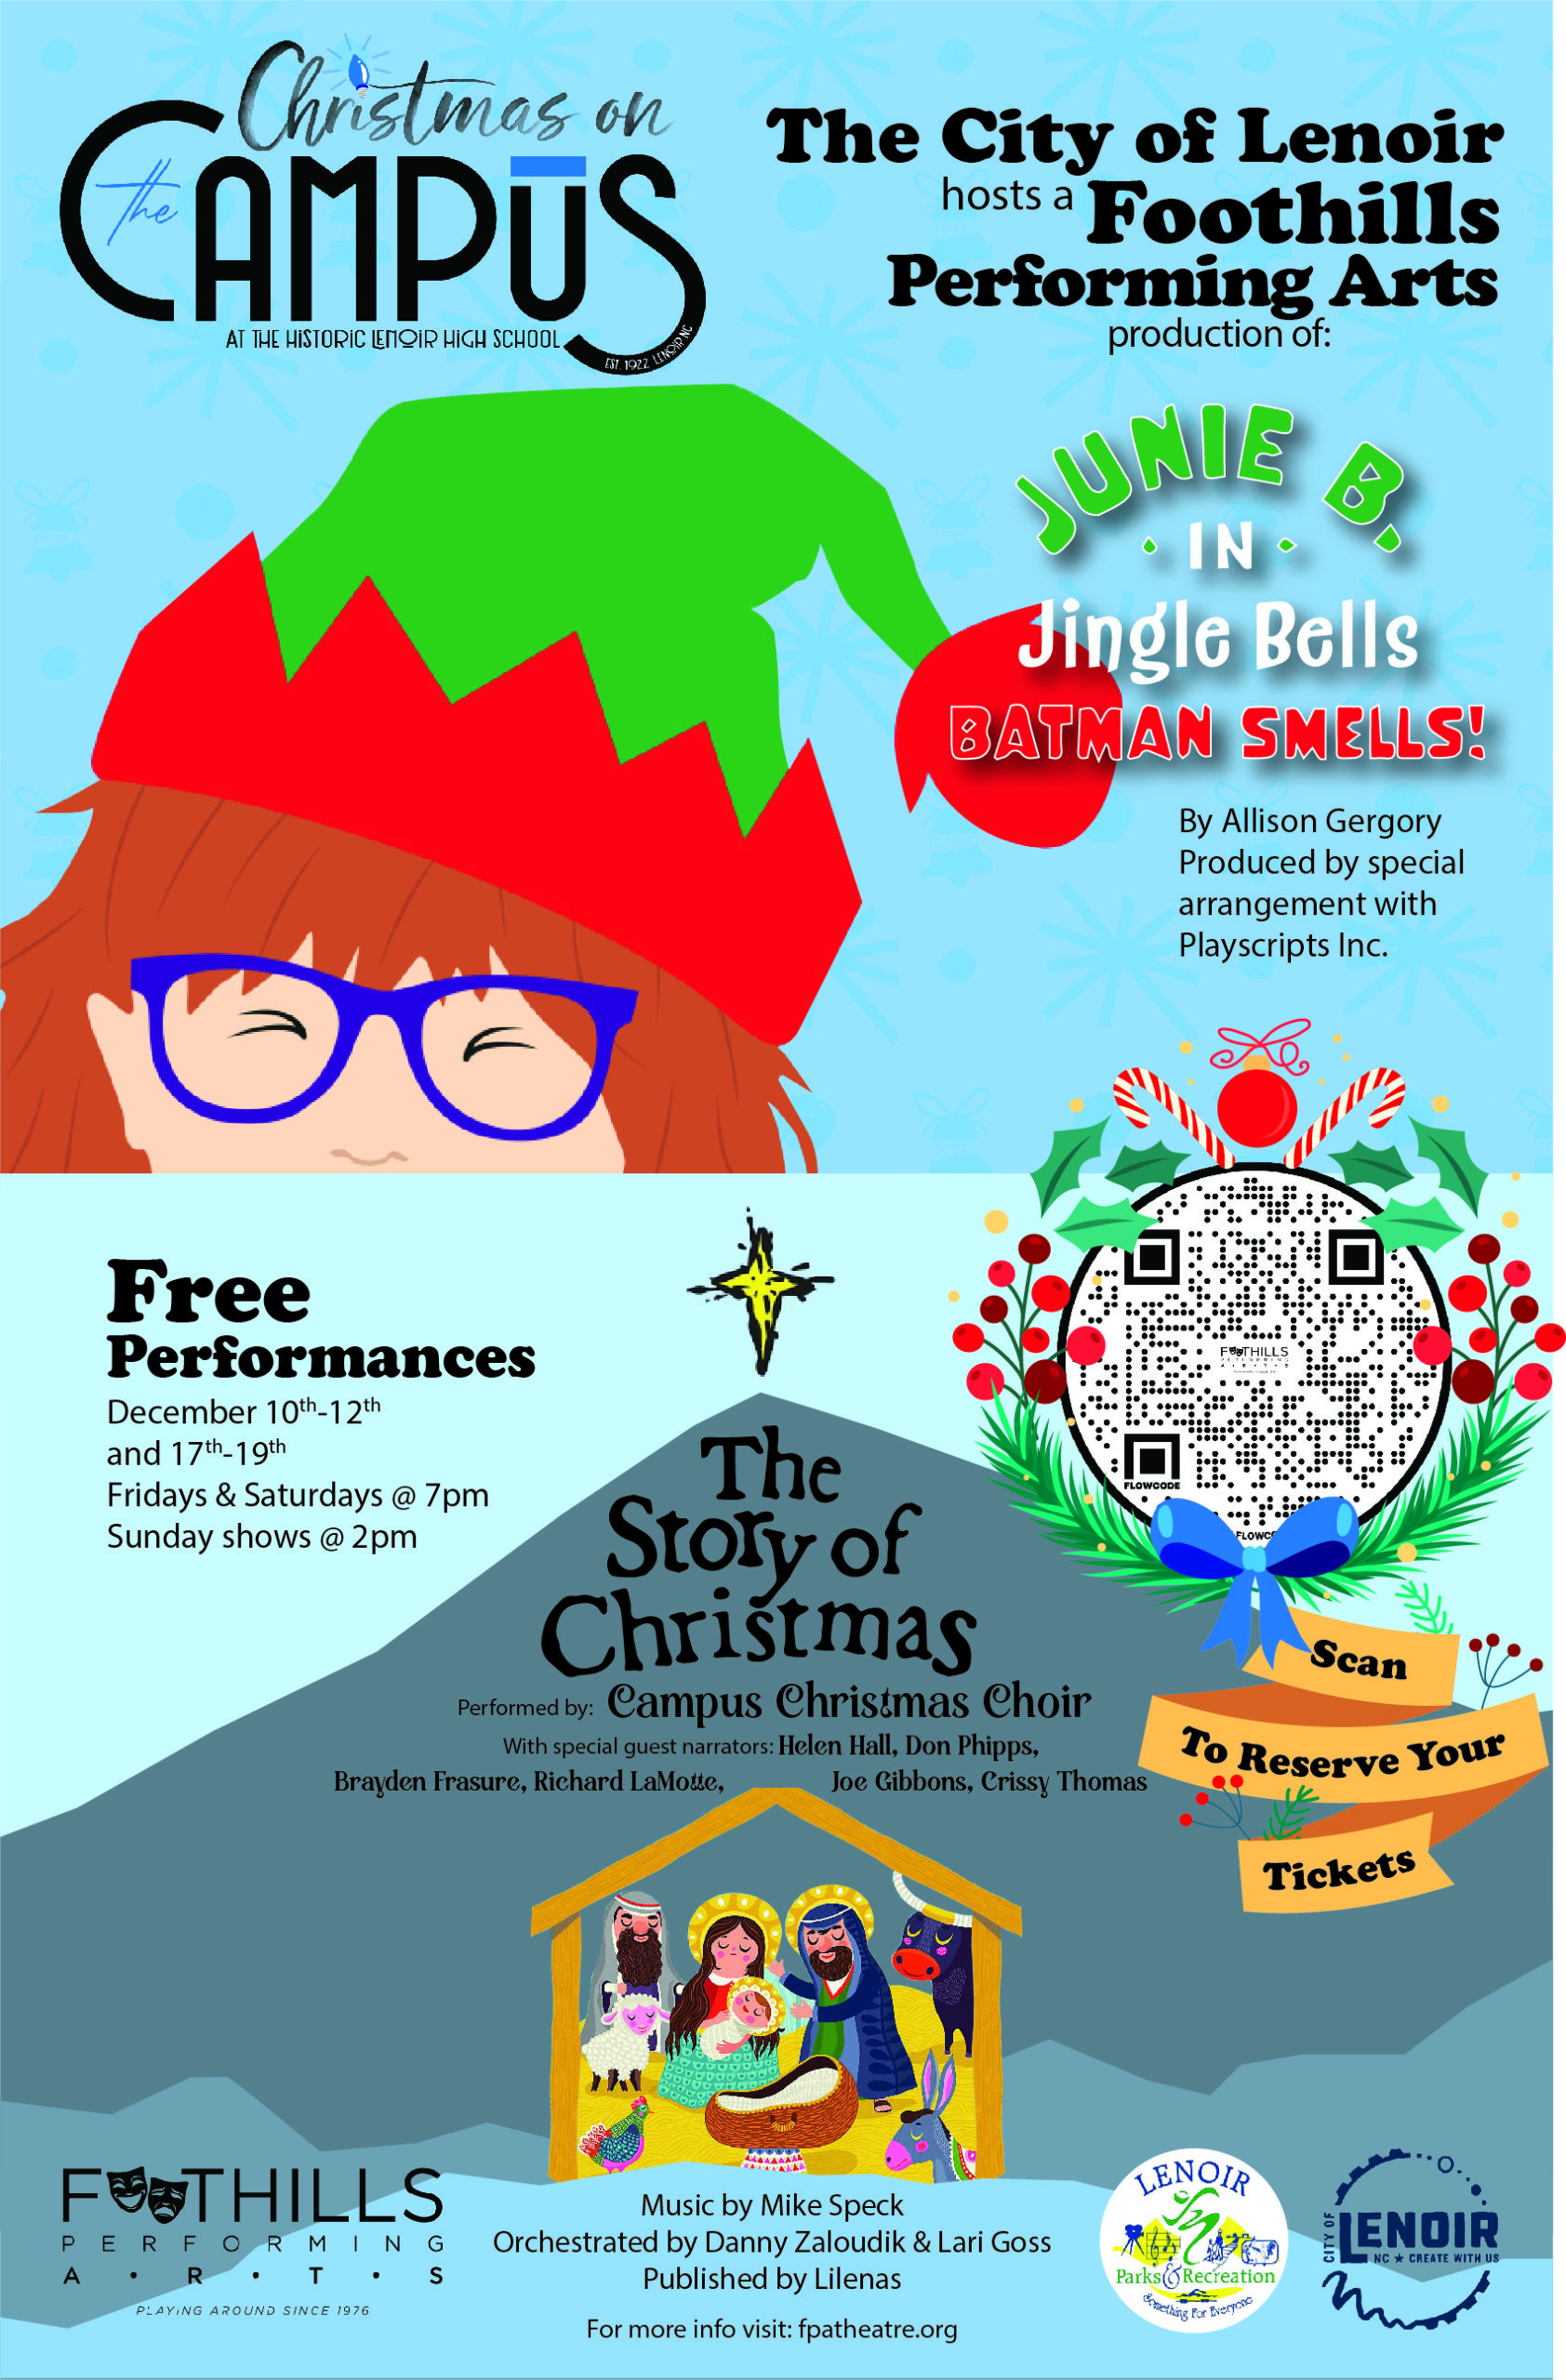 FOOTHILLS PERFORMING ARTS GIVING FREE CHRISTMAS SHOWS IN DOWNTOWN LENOIR